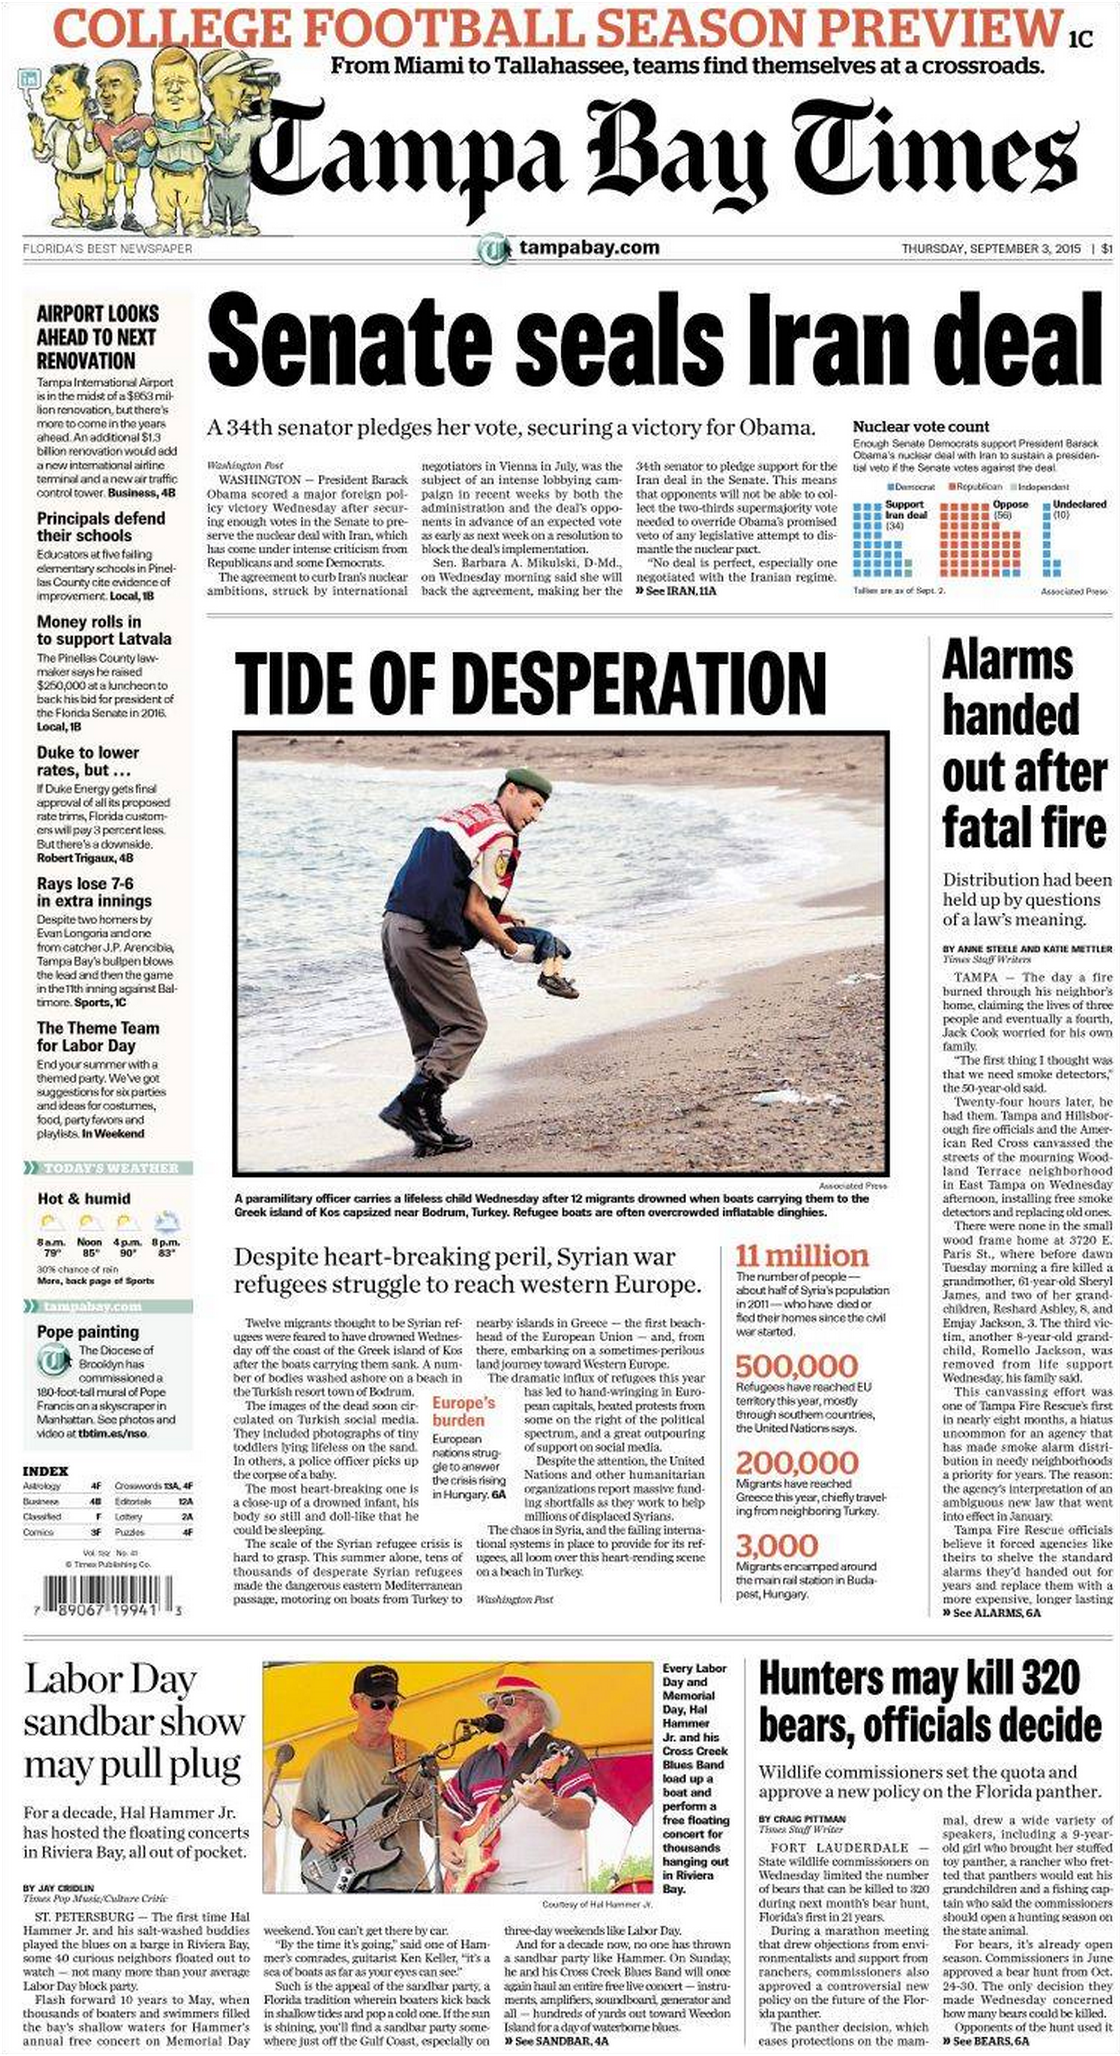 Drowned Migrant Boy Tampa Bay Times front page